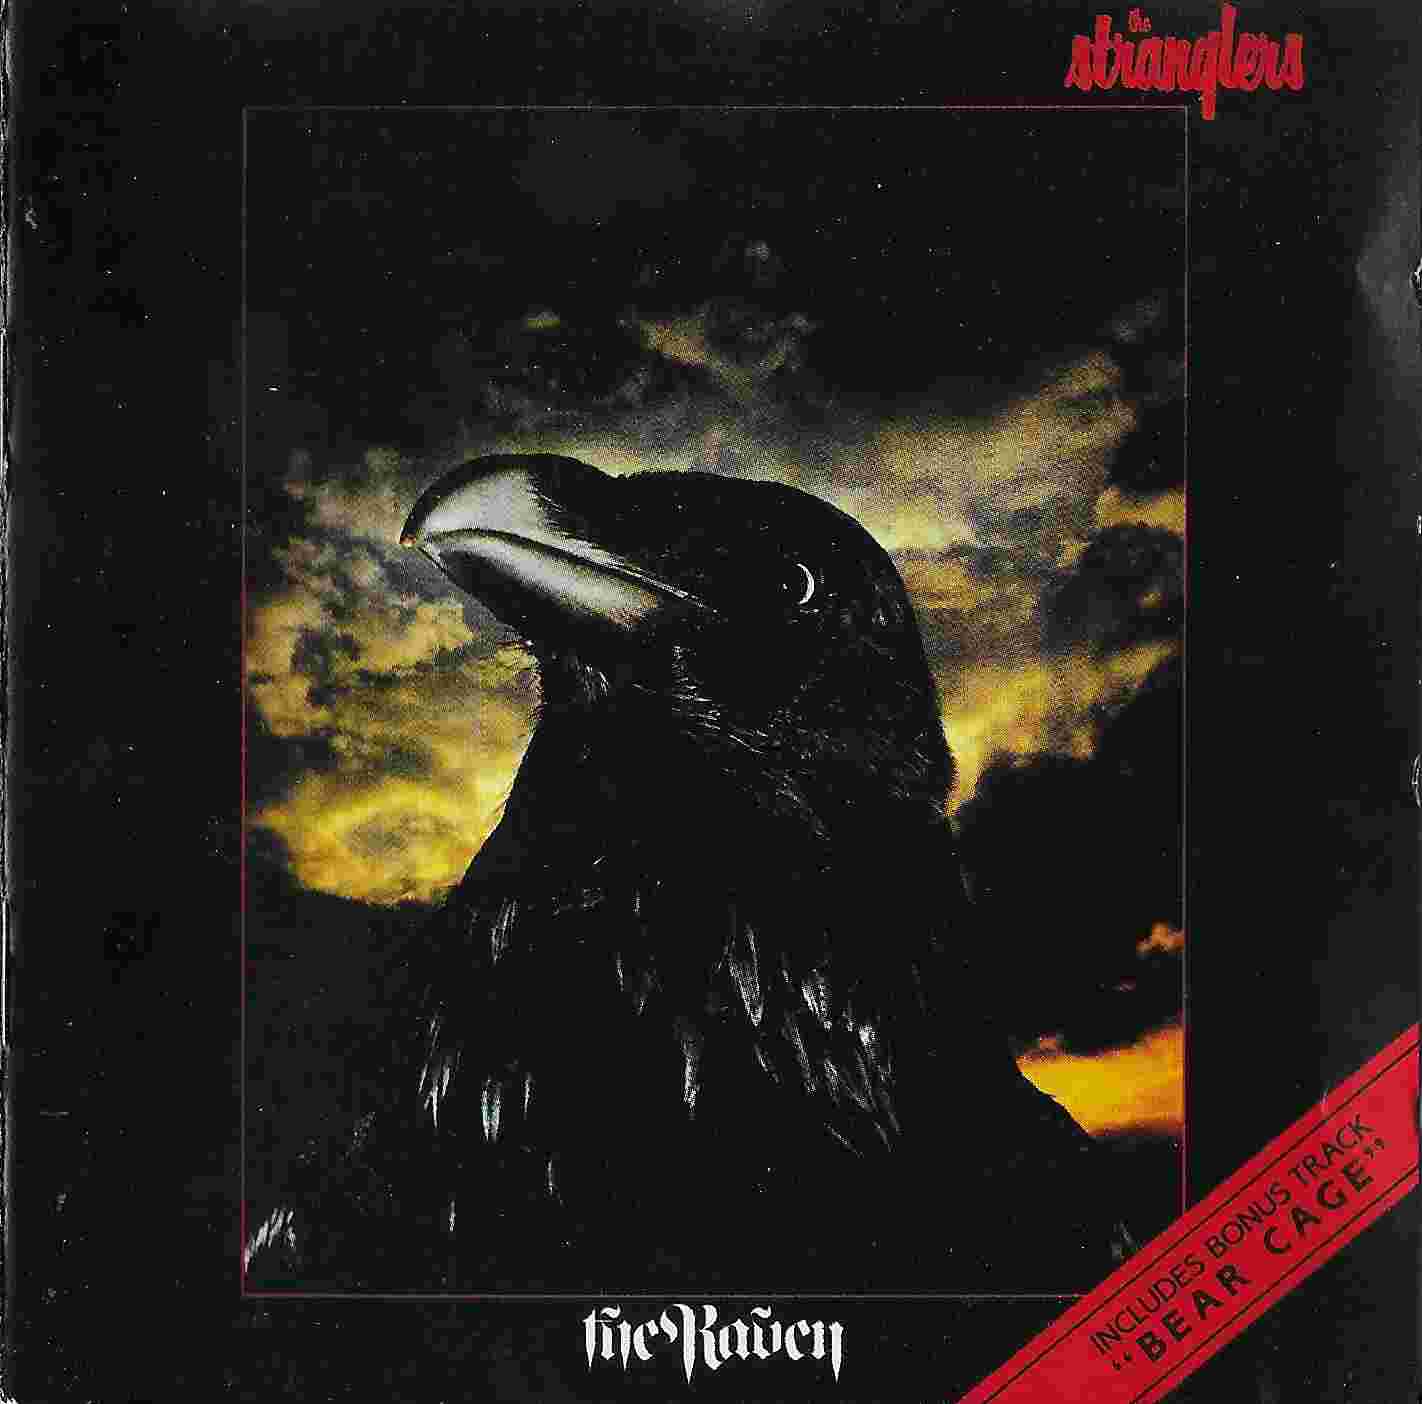 Picture of The raven by artist The Stranglers from The Stranglers cds